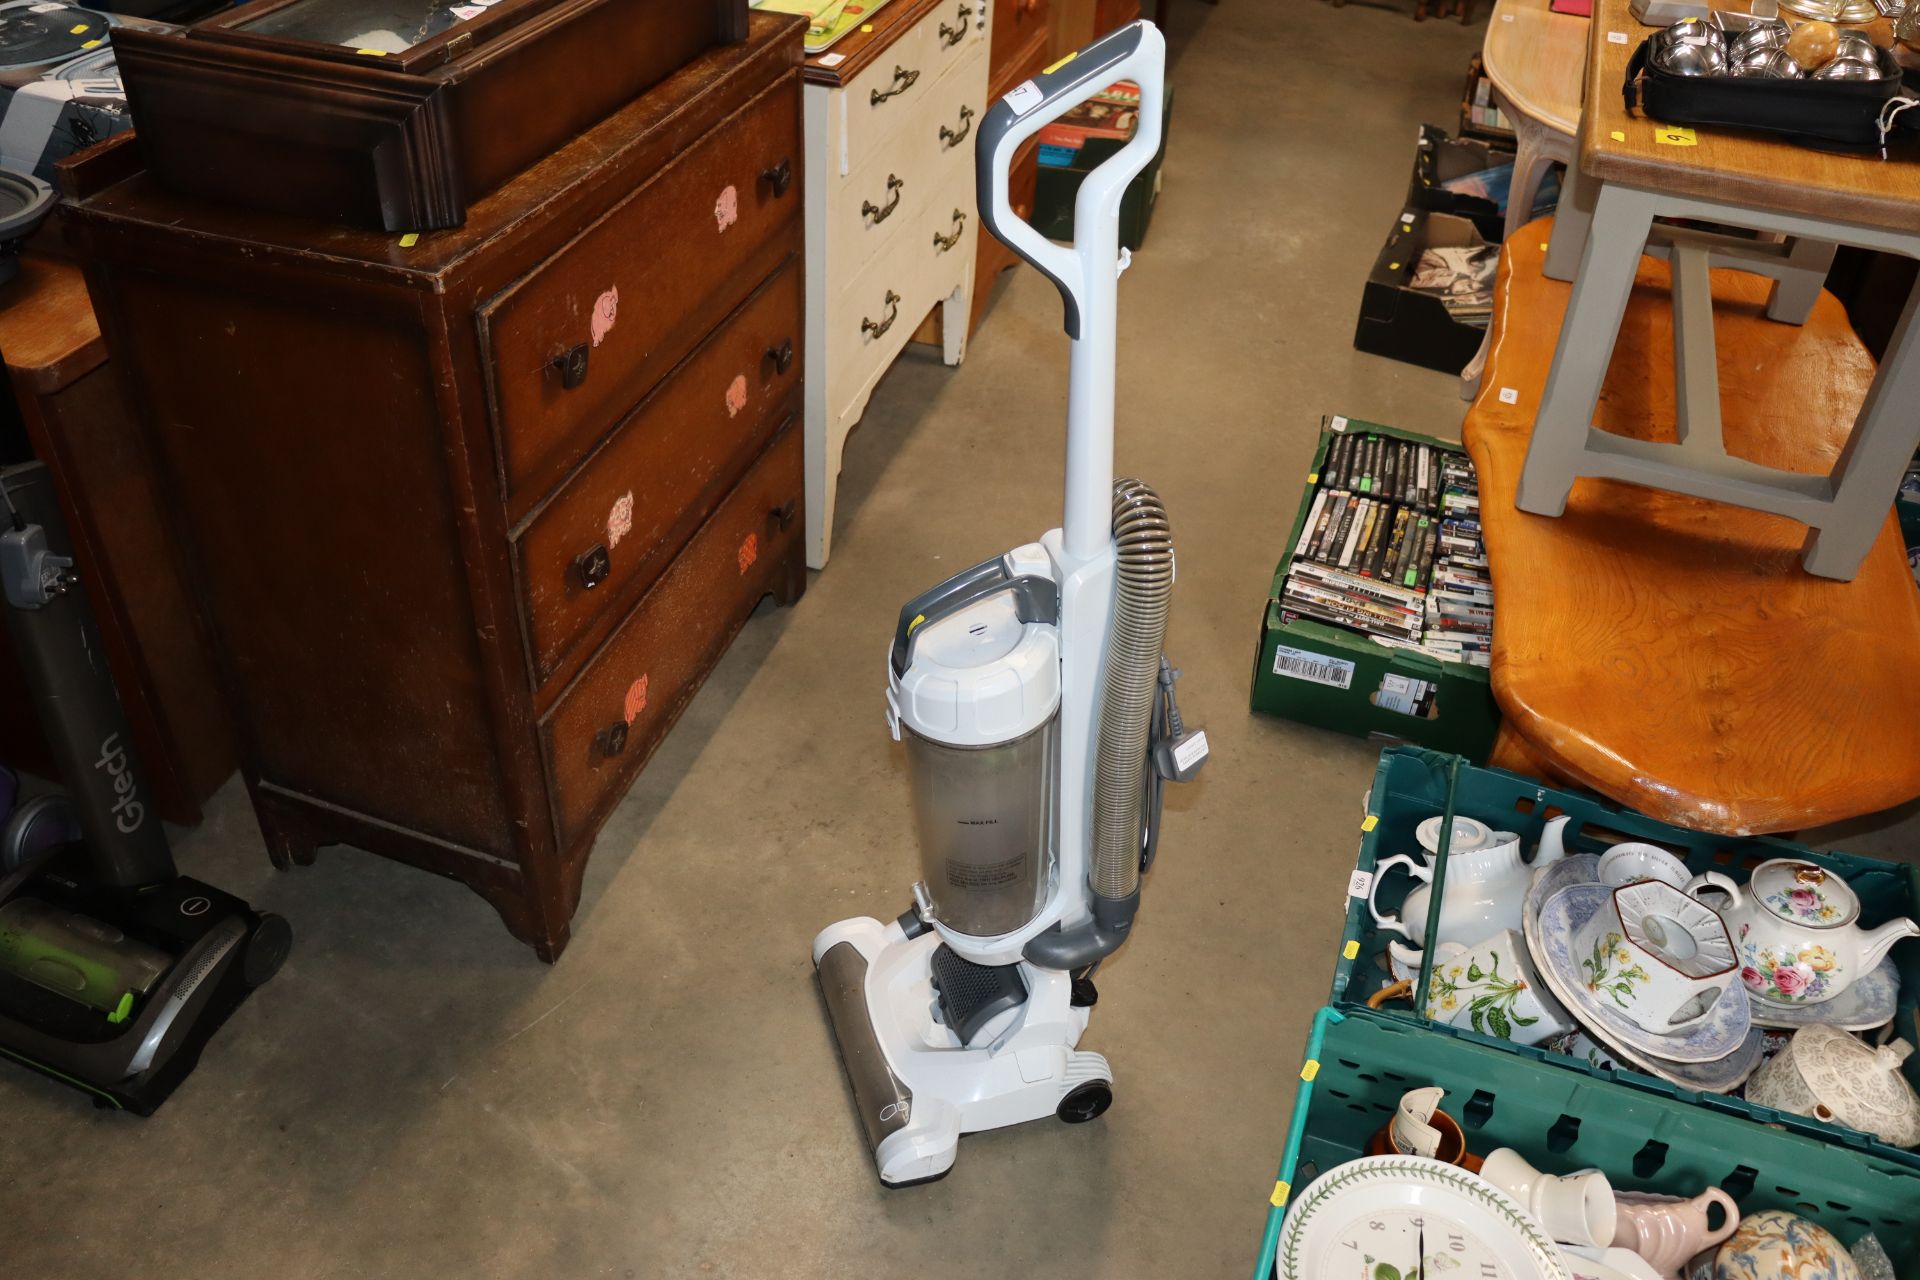 An upright vacuum cleaner